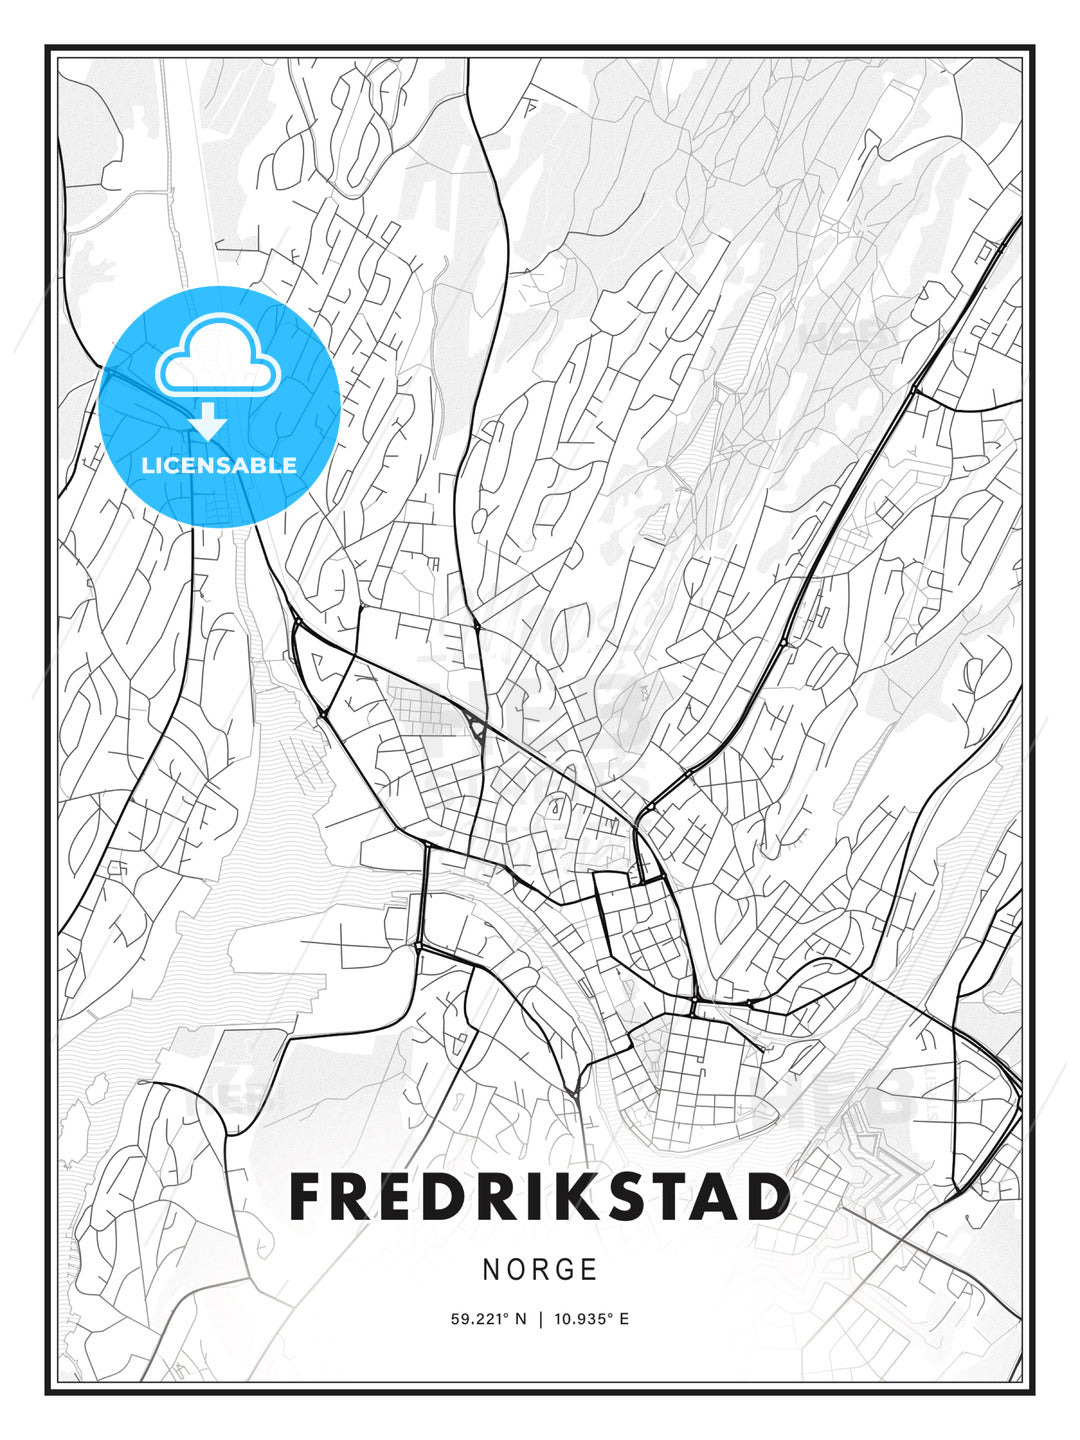 Fredrikstad, Norway, Modern Print Template in Various Formats - HEBSTREITS Sketches